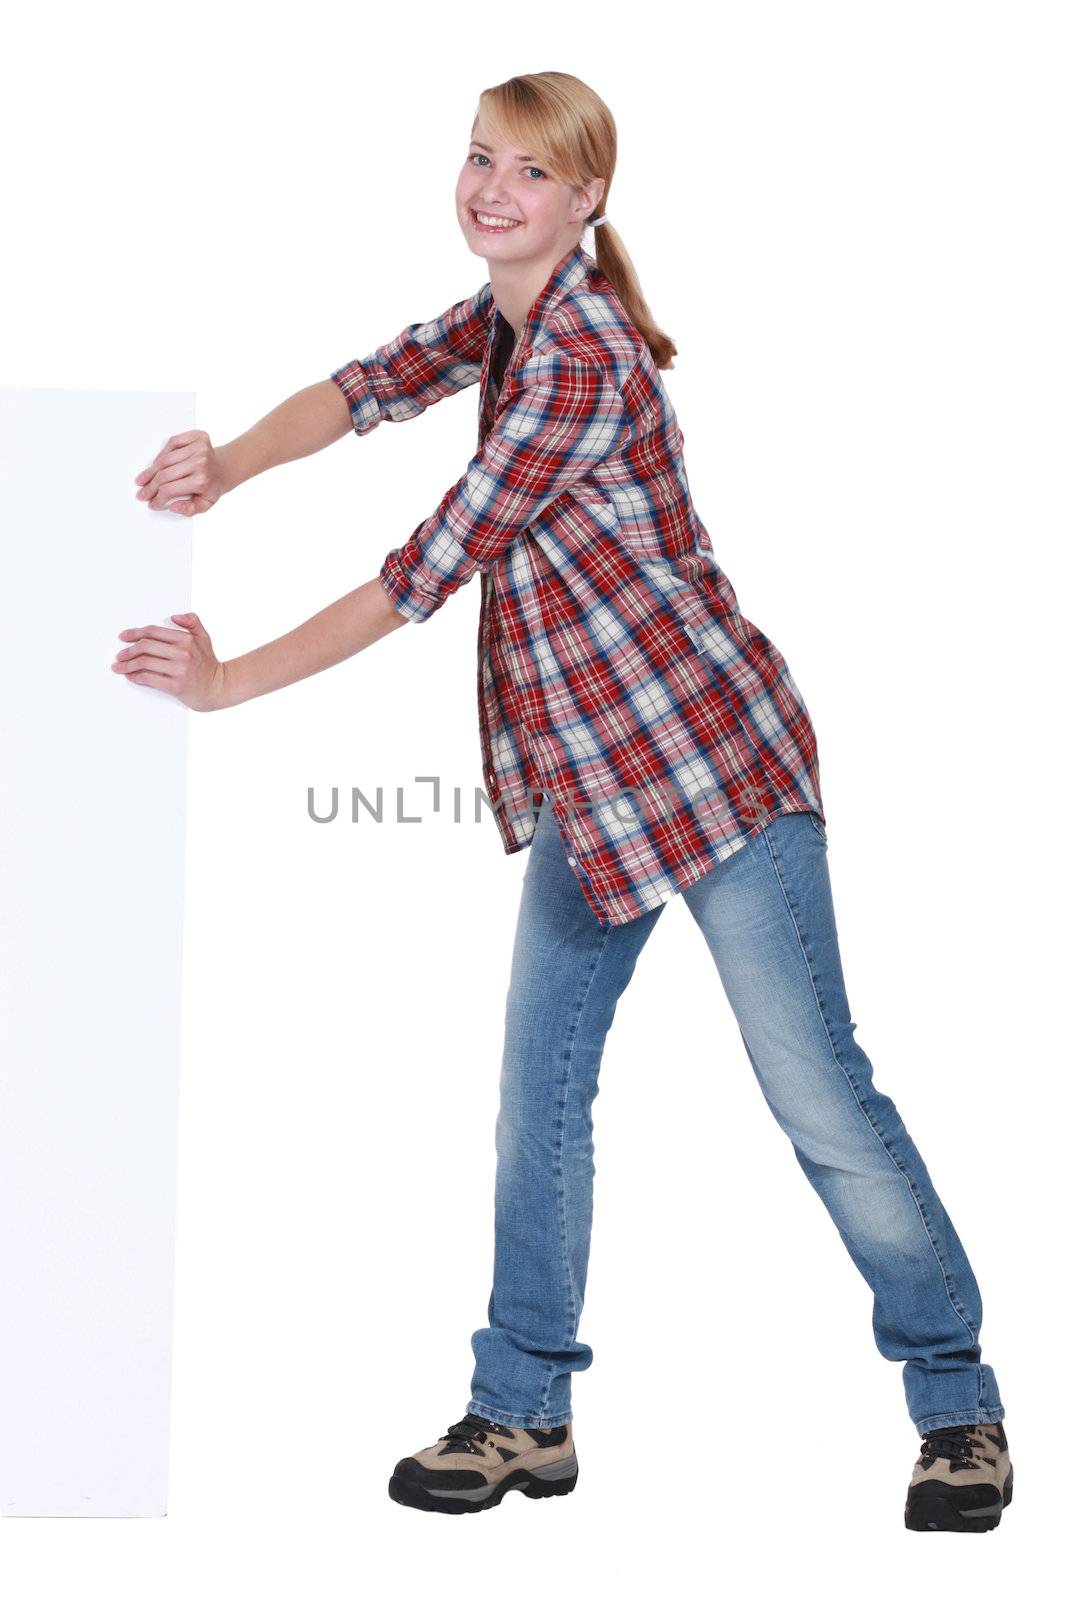 Woman pushing against blank poster